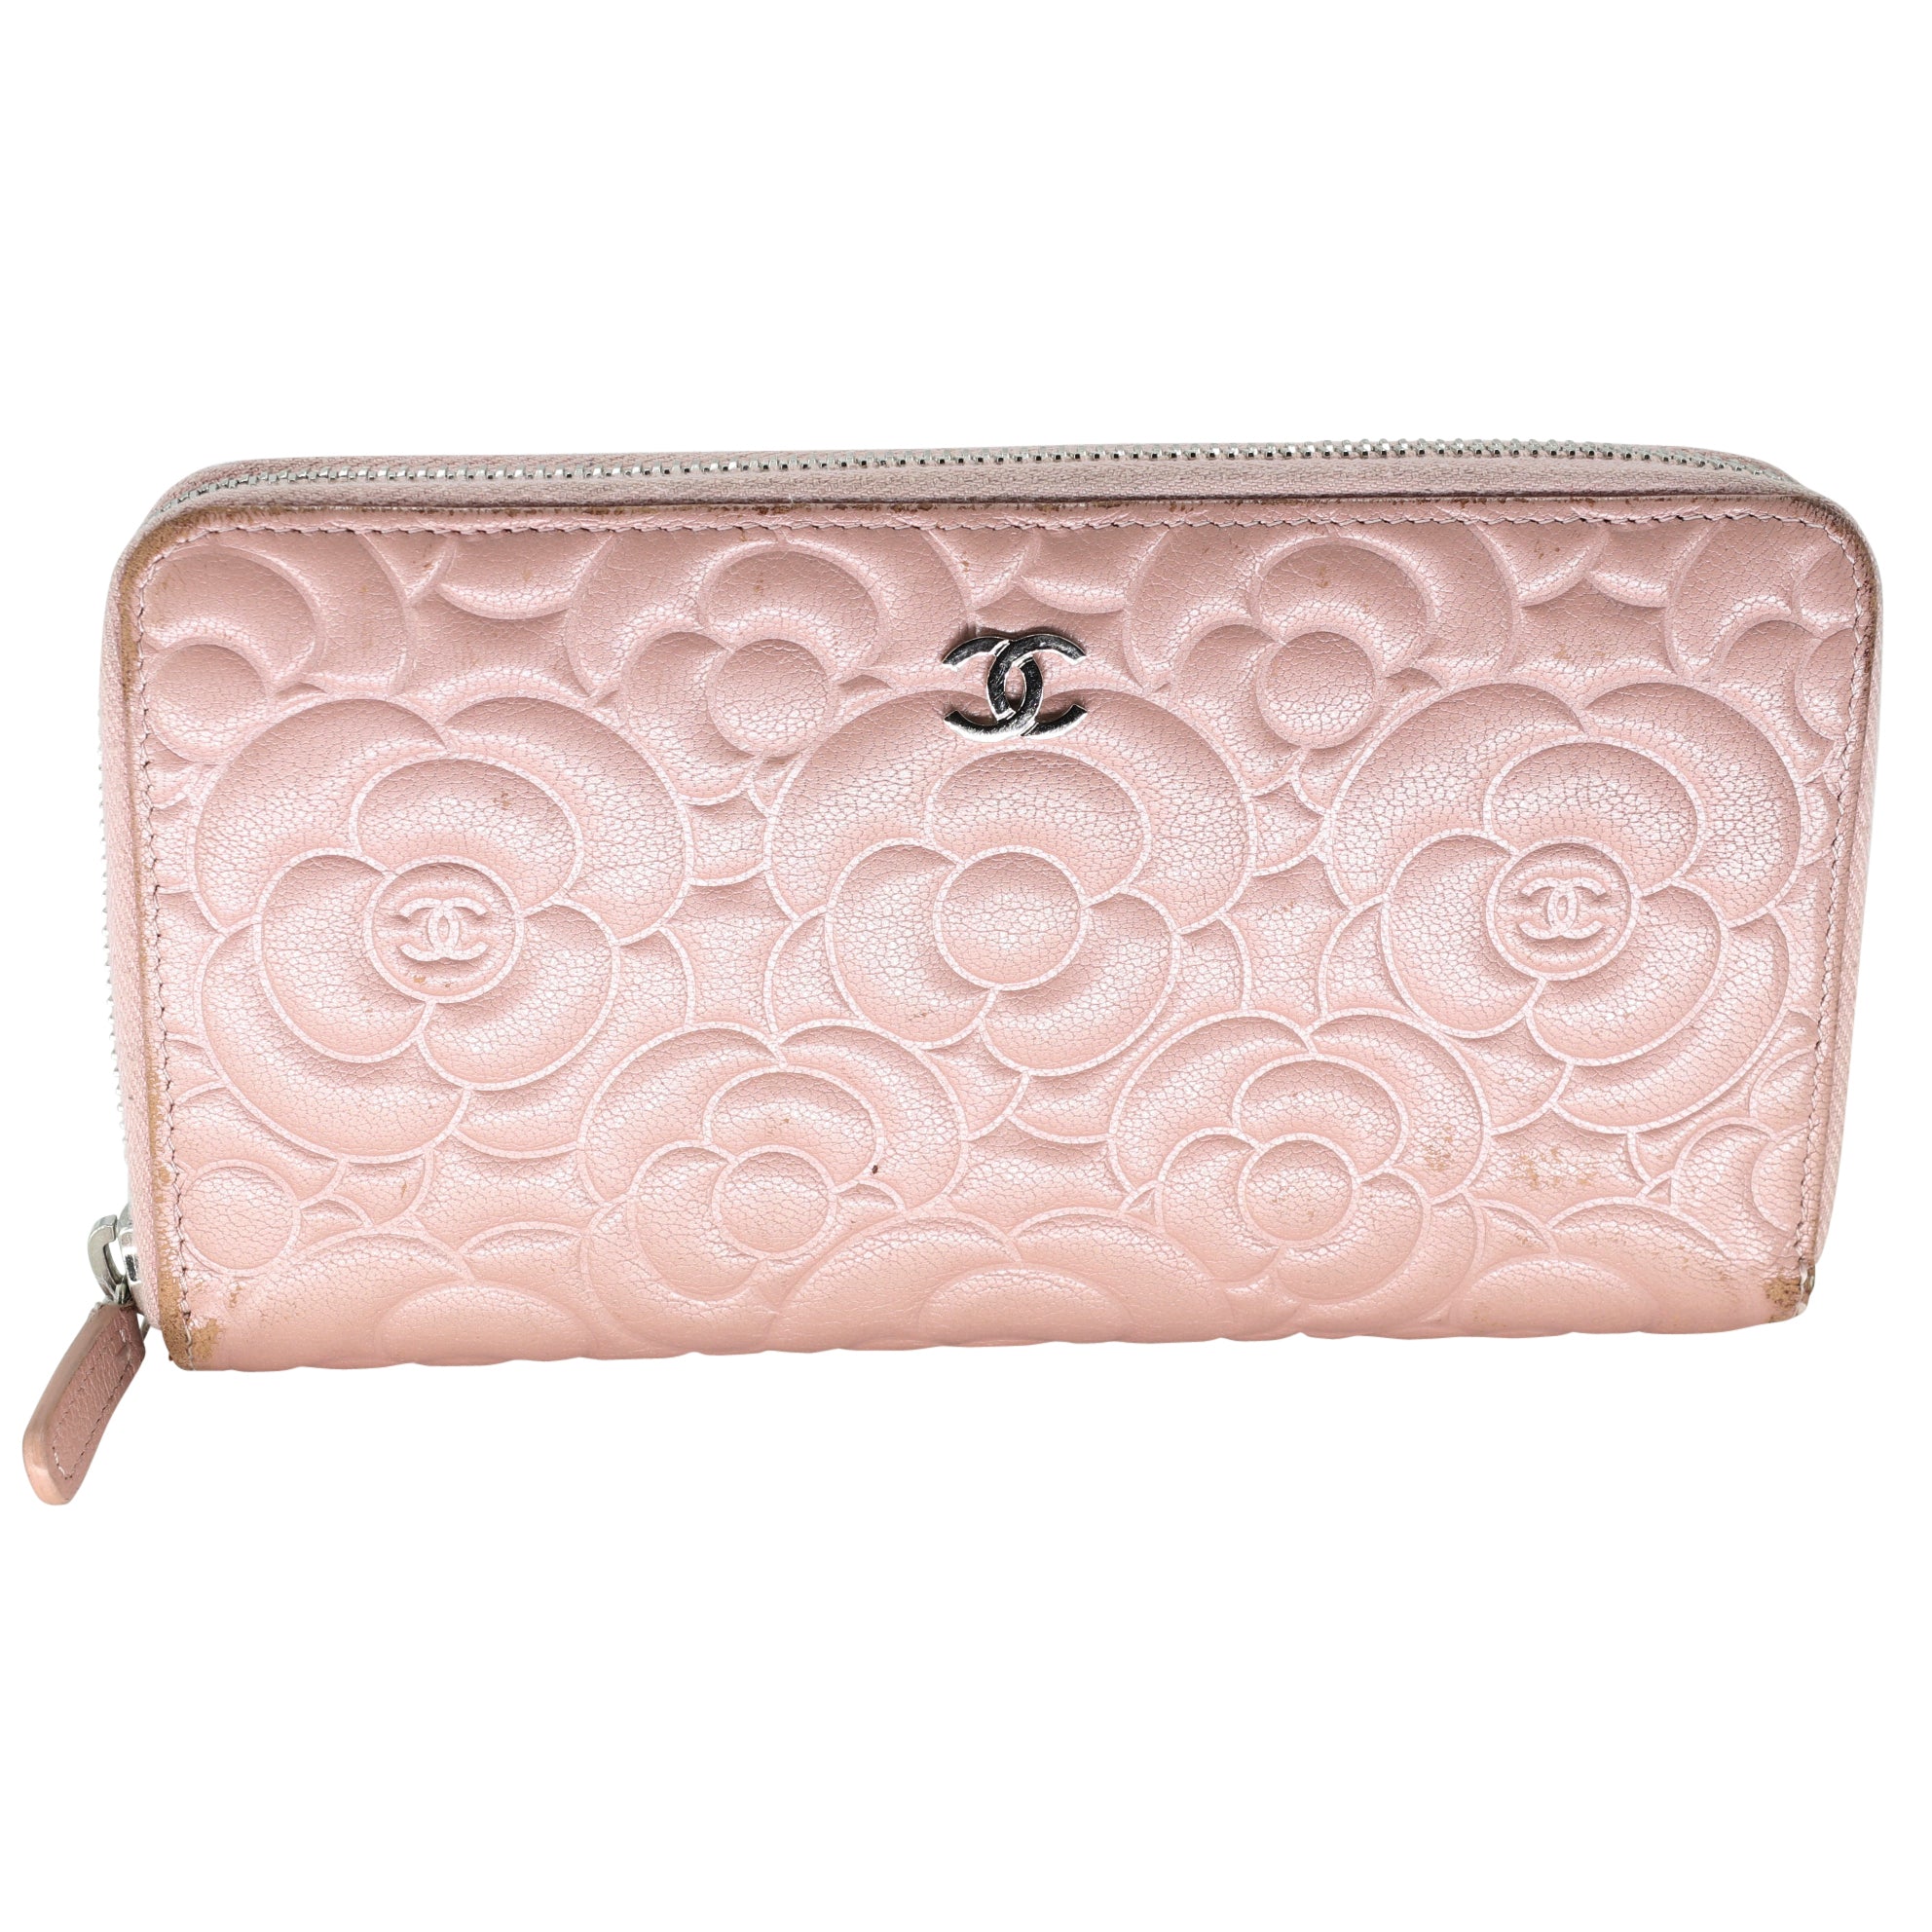 Authentic CHANEL Camellia Leather Around Zip Long Wallet #21369